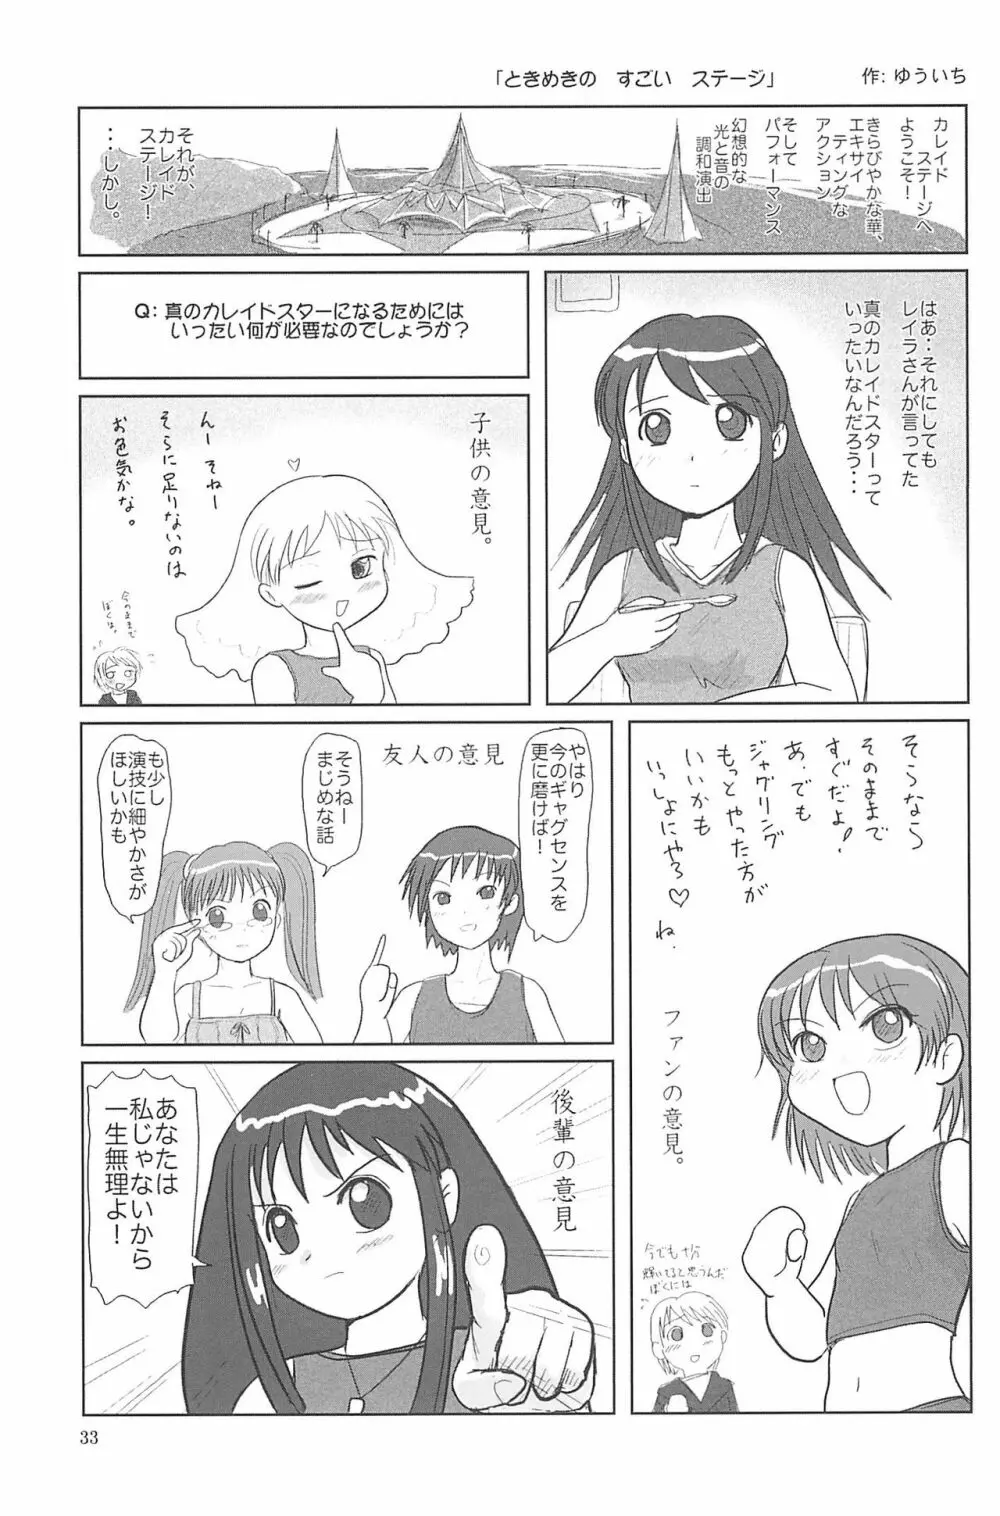 ND-special Volume 5 33ページ